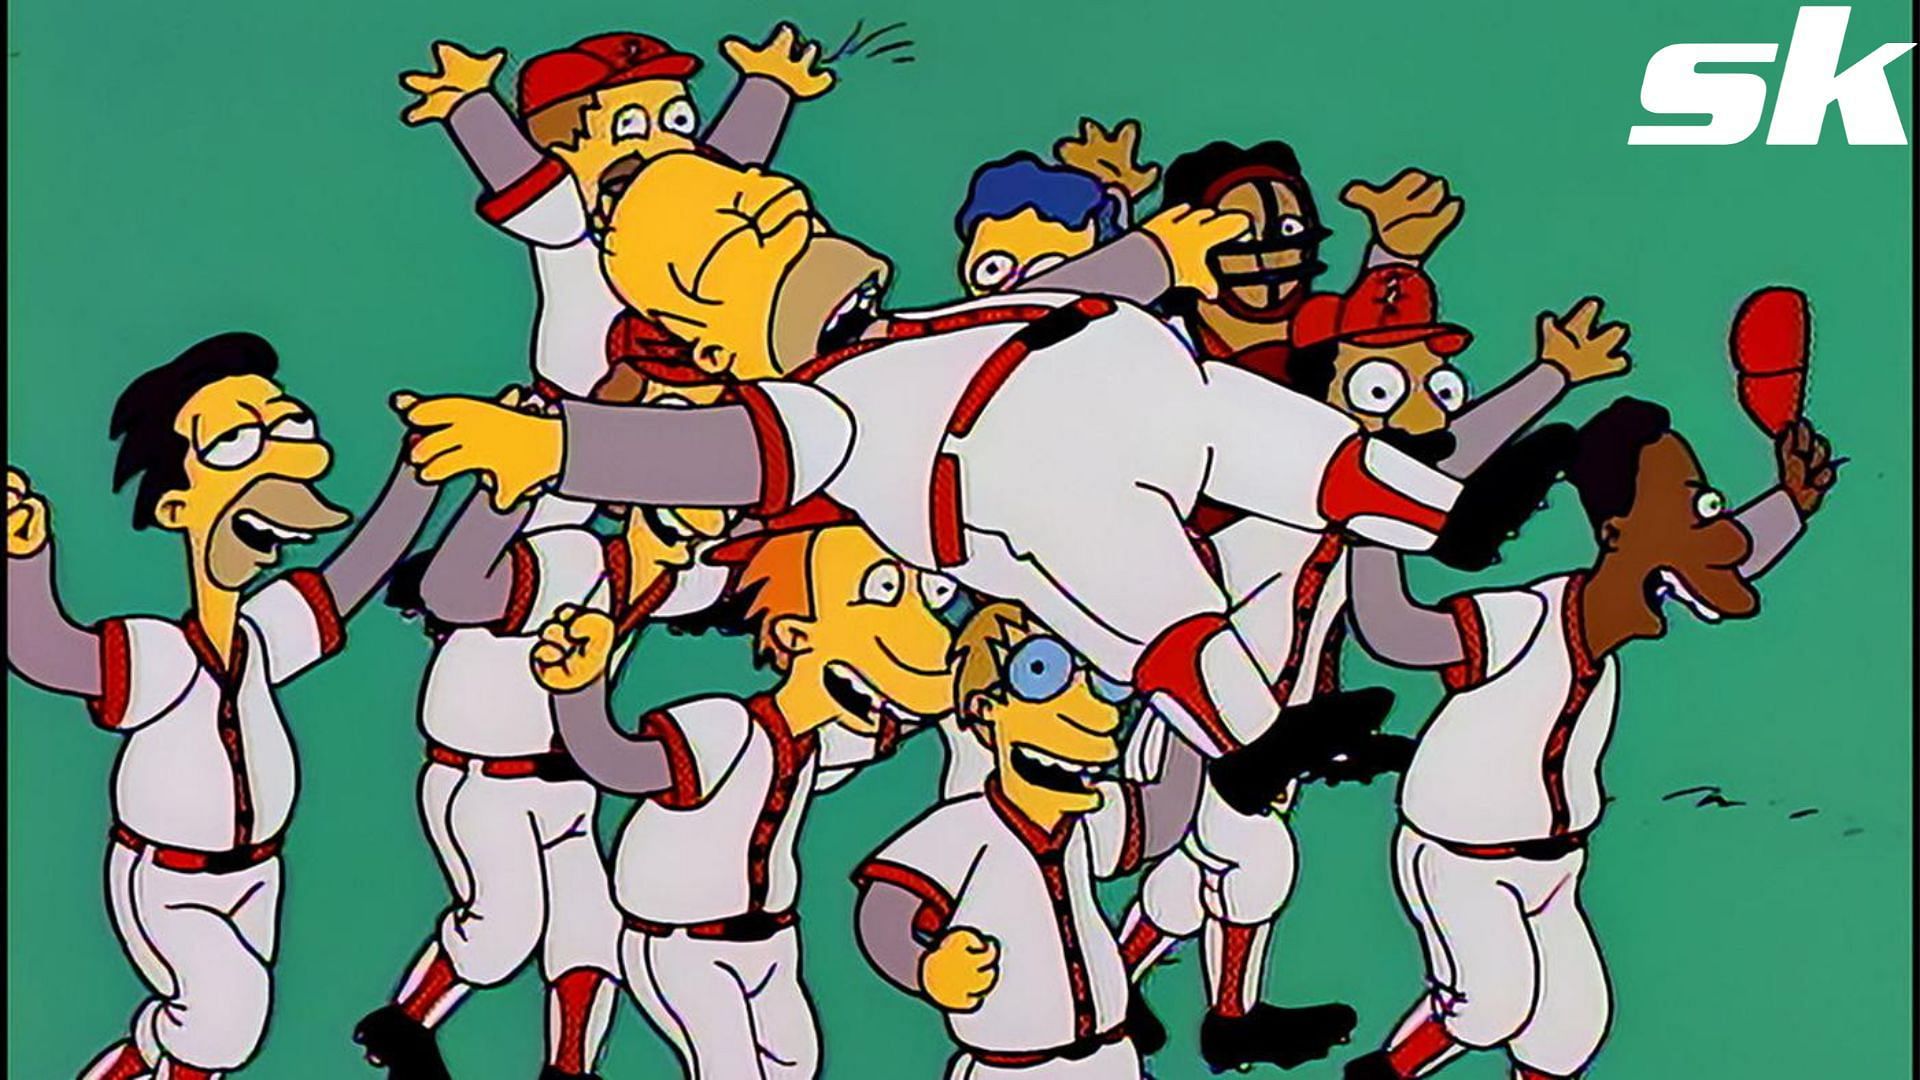 The Simpsons episode featuring nine MLB legends - It was like